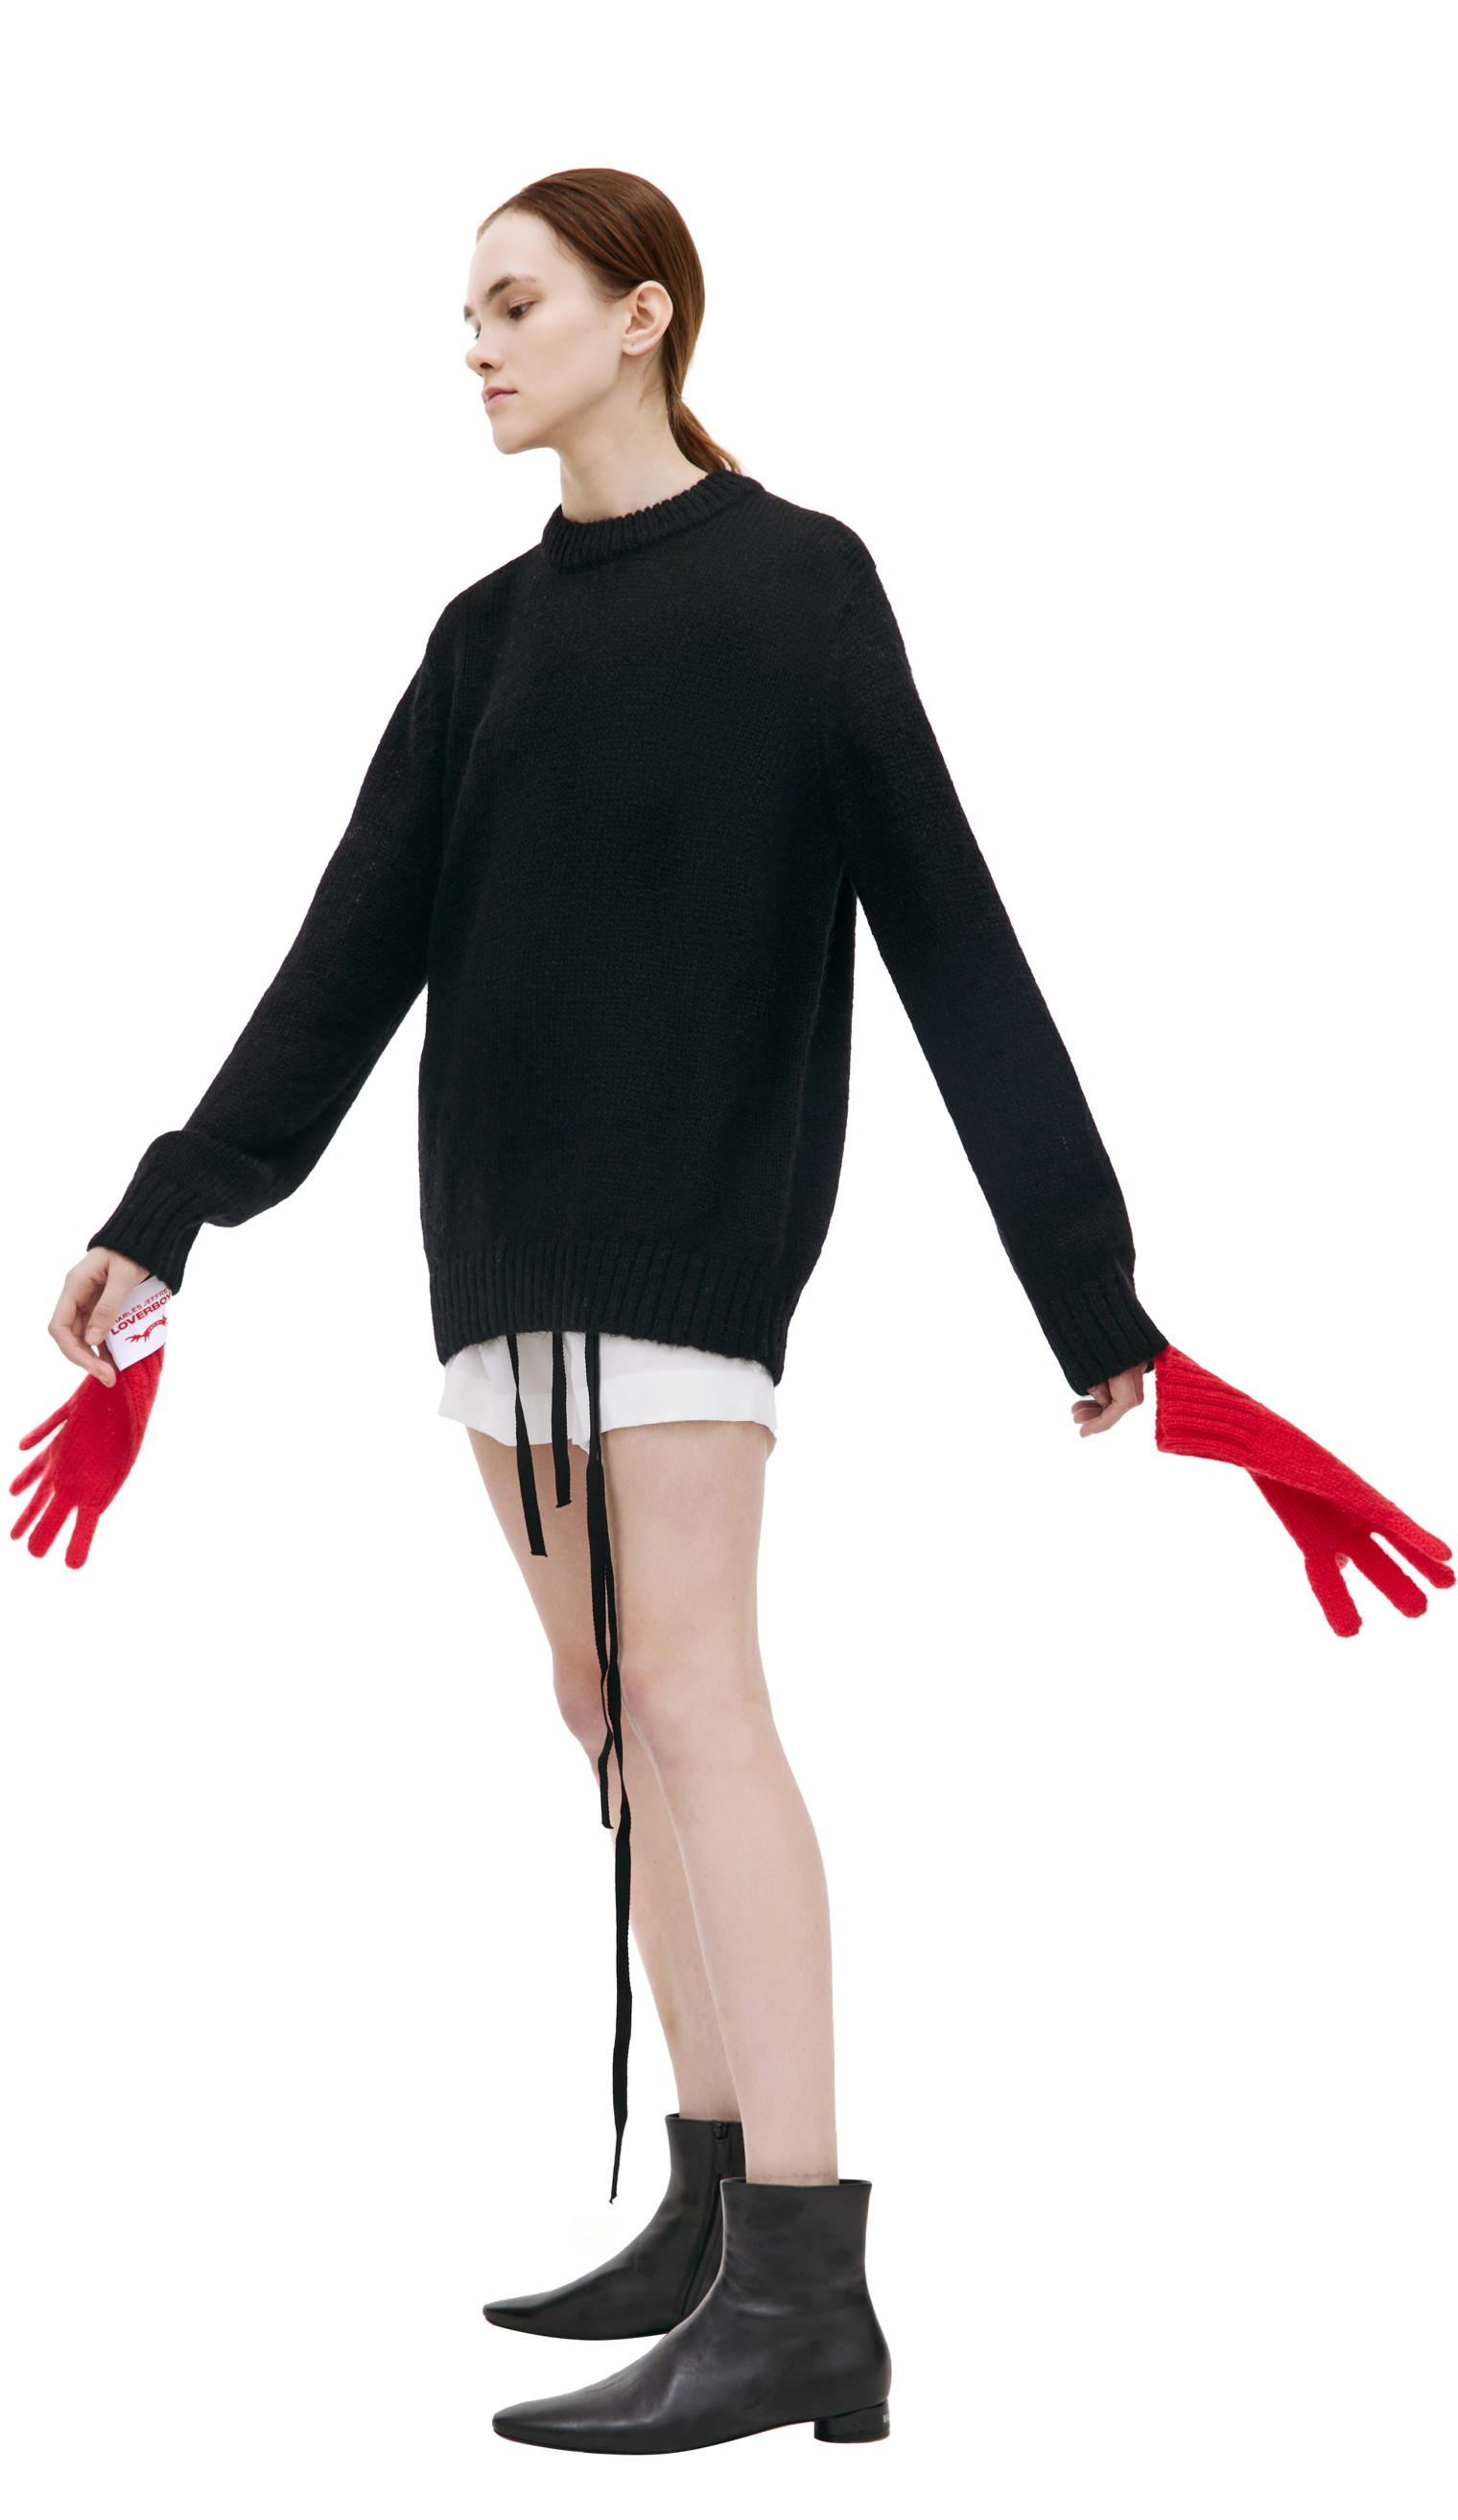 CHARLES JEFFREY LOVERBOY Sweater with removable gloves